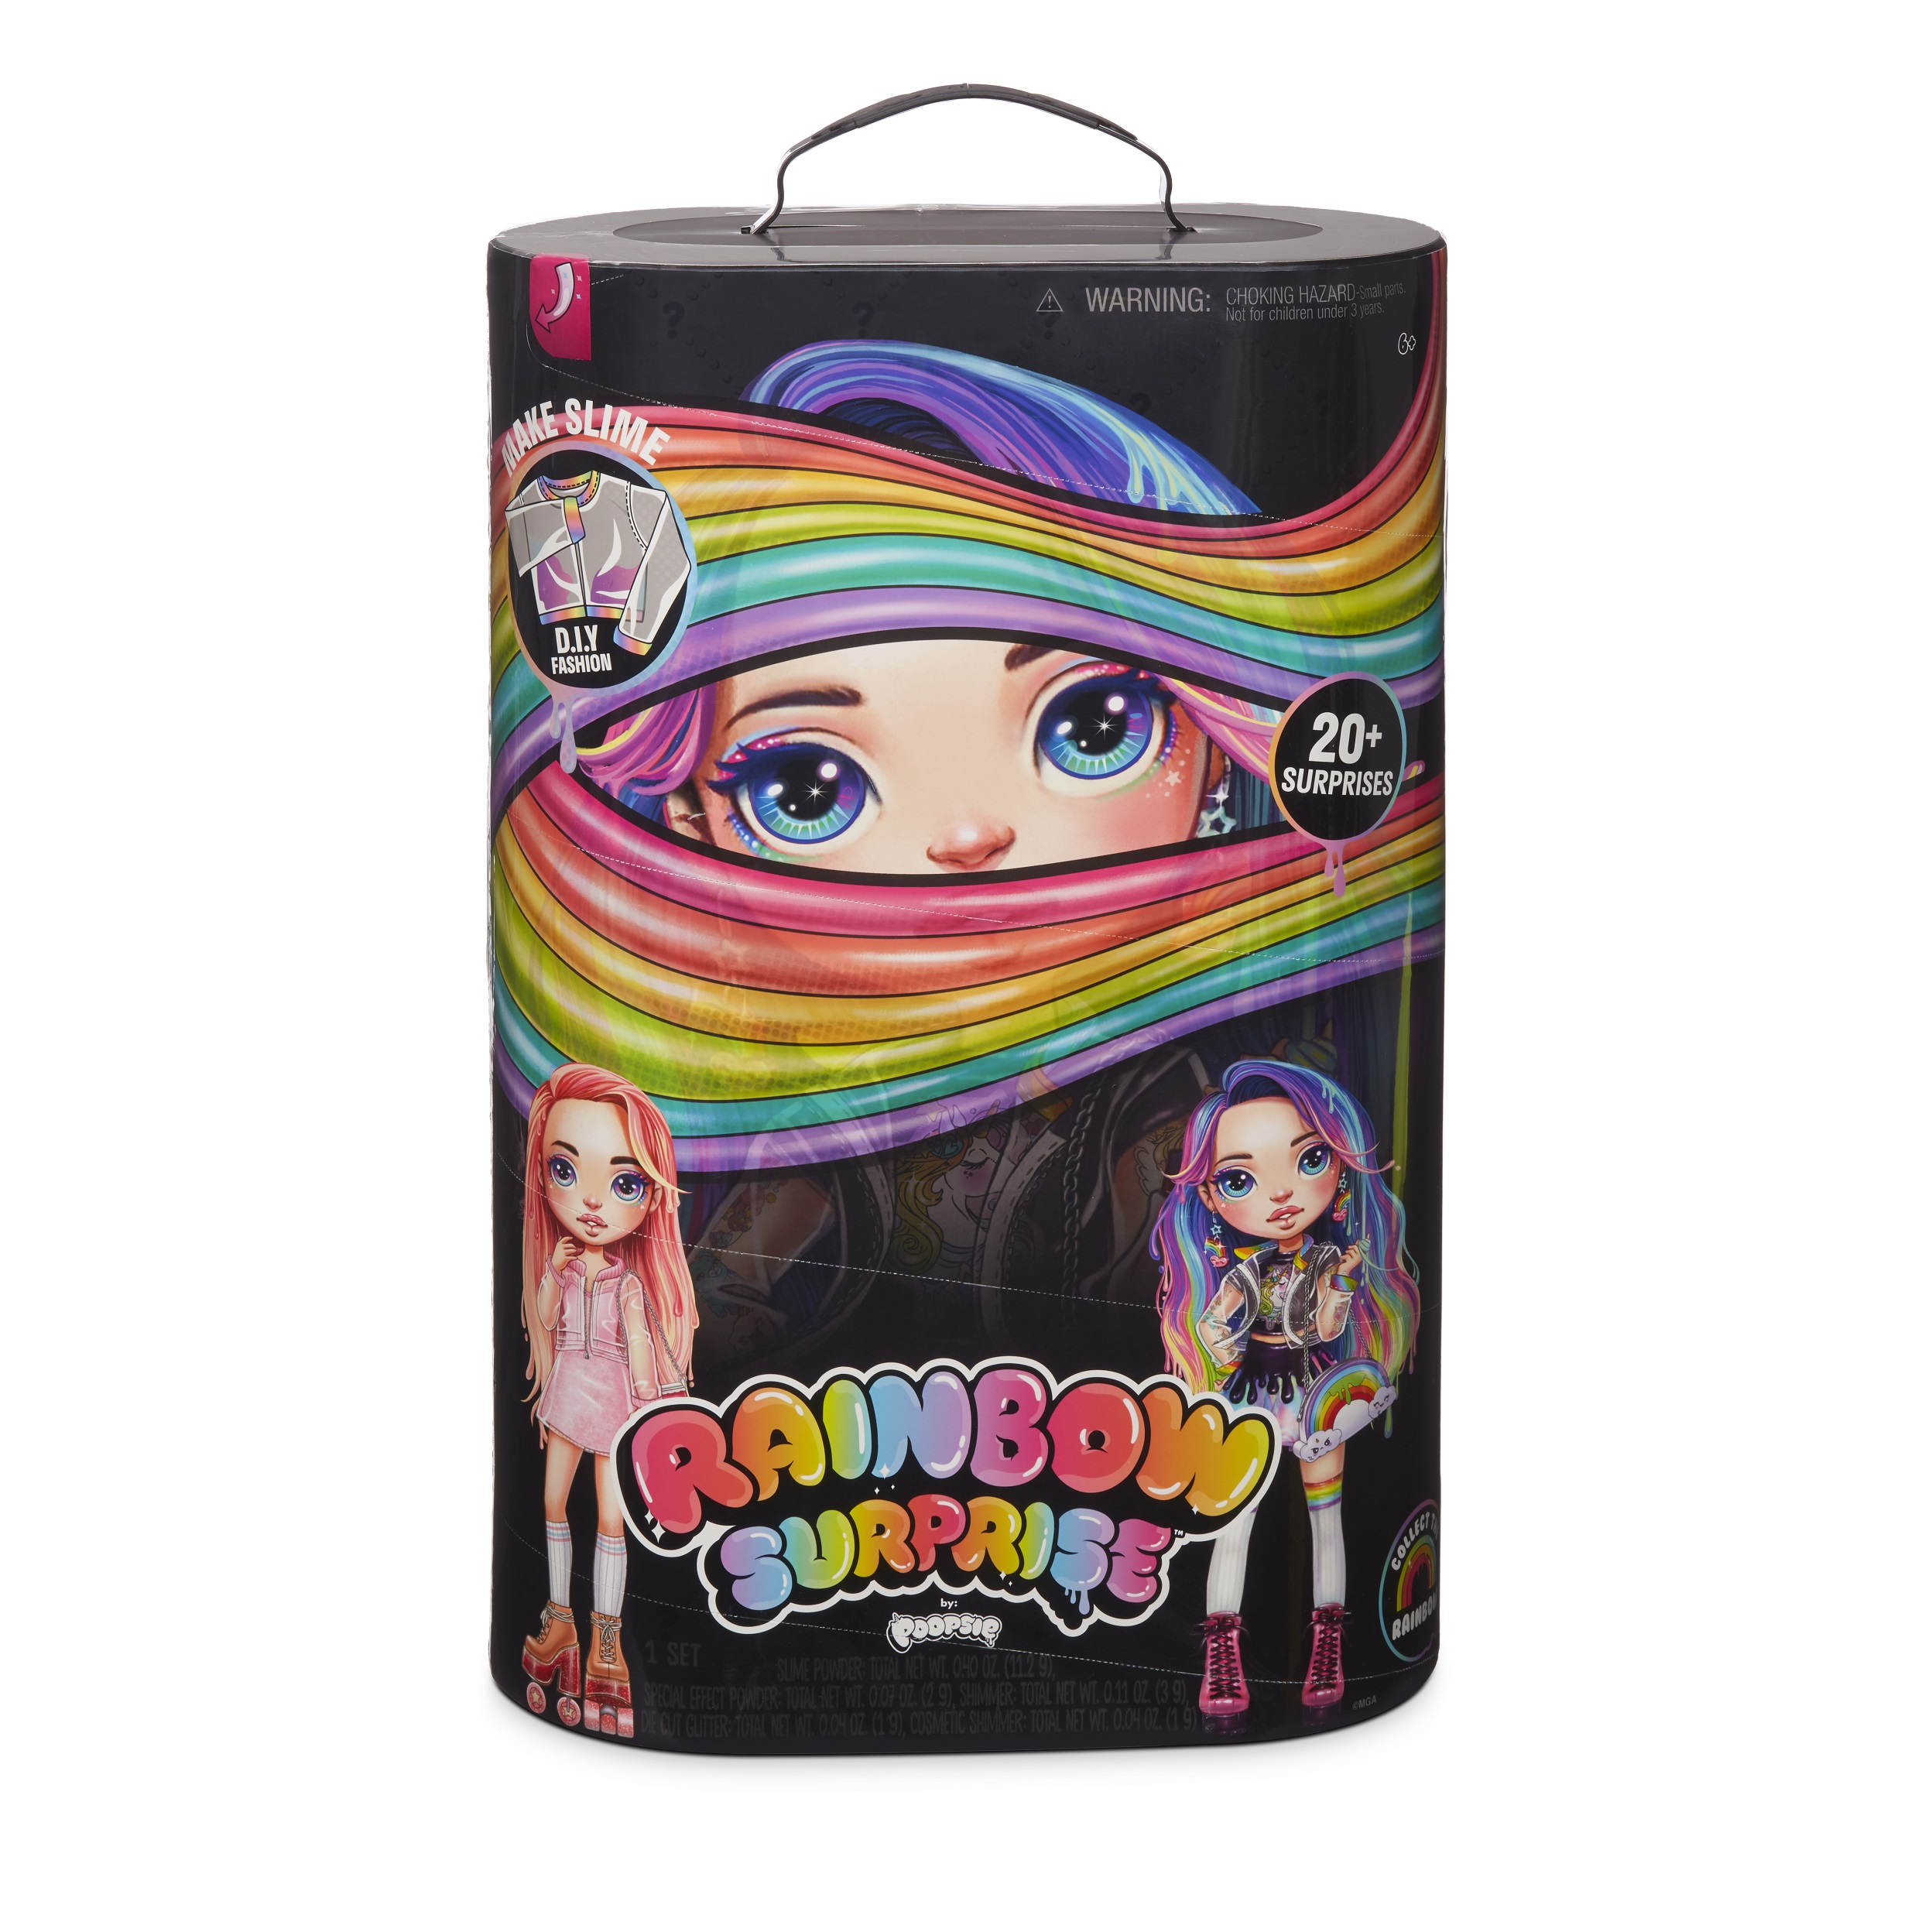 Rainbow Surprise by Poopsie: 14" Doll with 20+ Slime & Fashion Surprises, Rainbow Dream or Pixie Rose - image 3 of 8